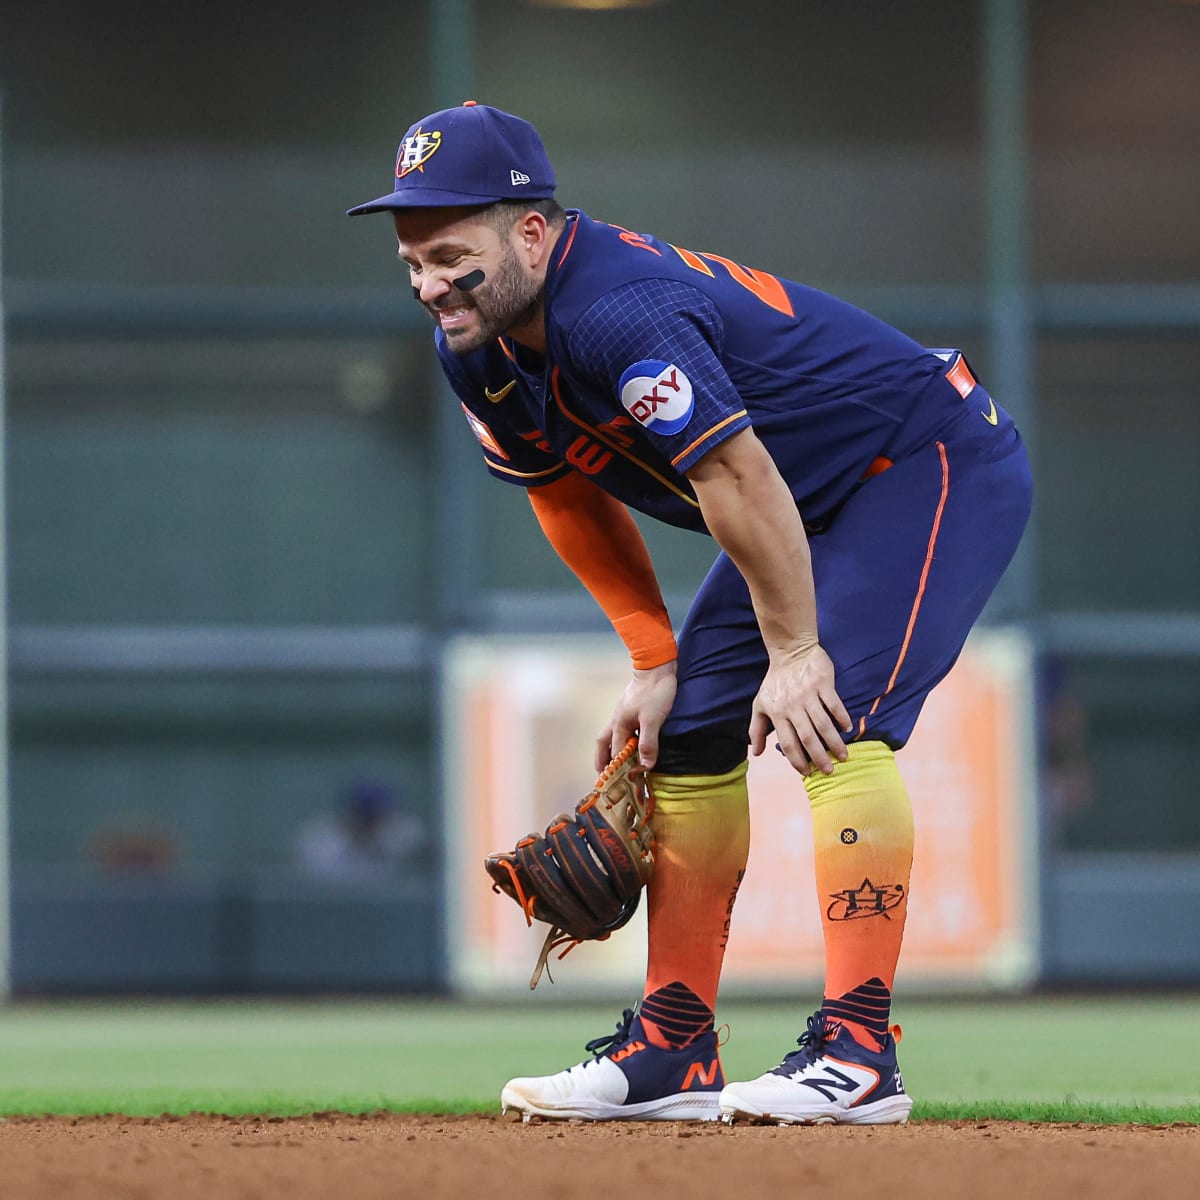 Houston Astros: Team will play every MLB opponent for first time